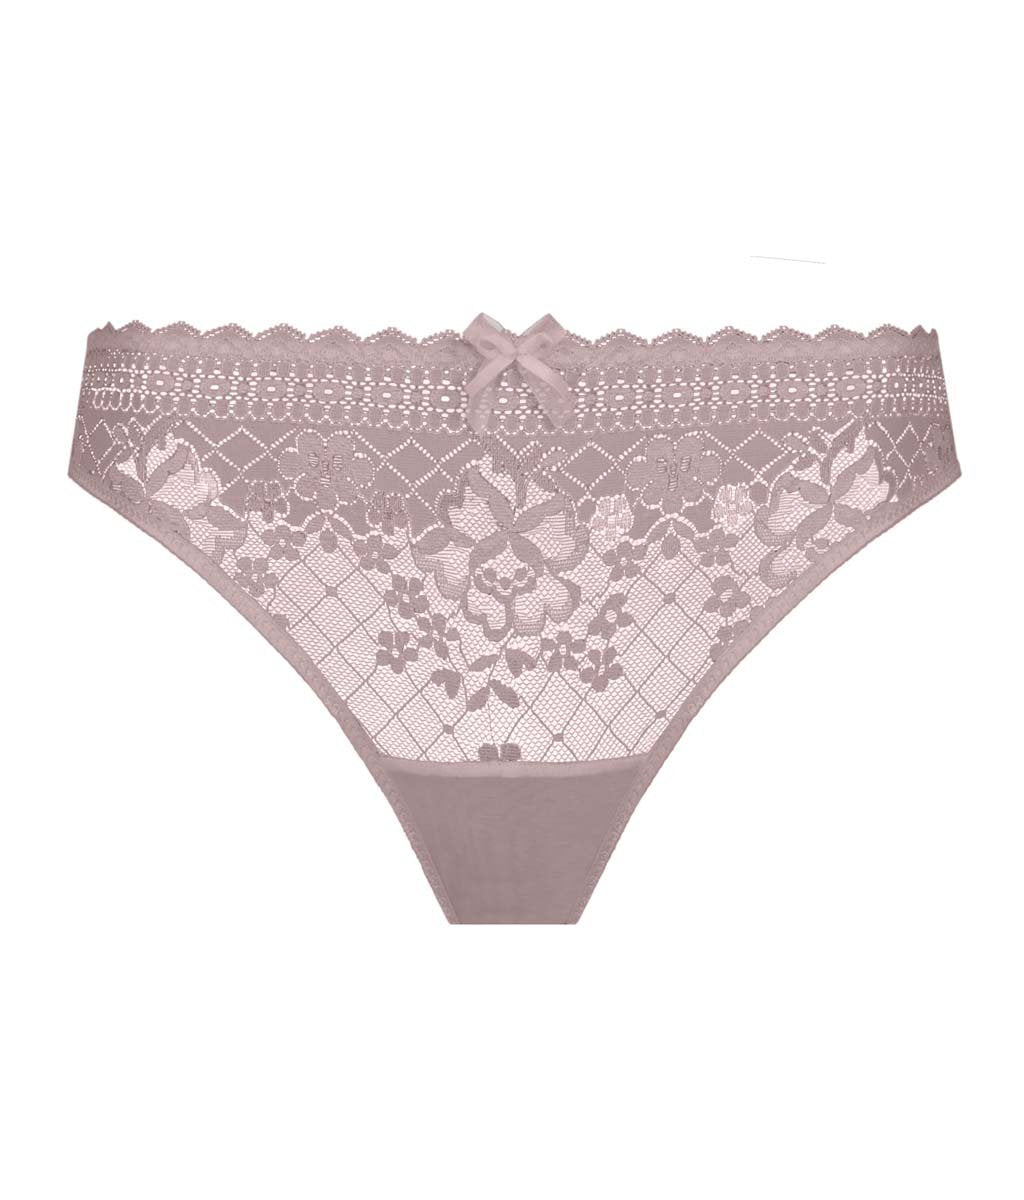 Empreinte's Best Selling Melody Collection - Lingerie Briefs